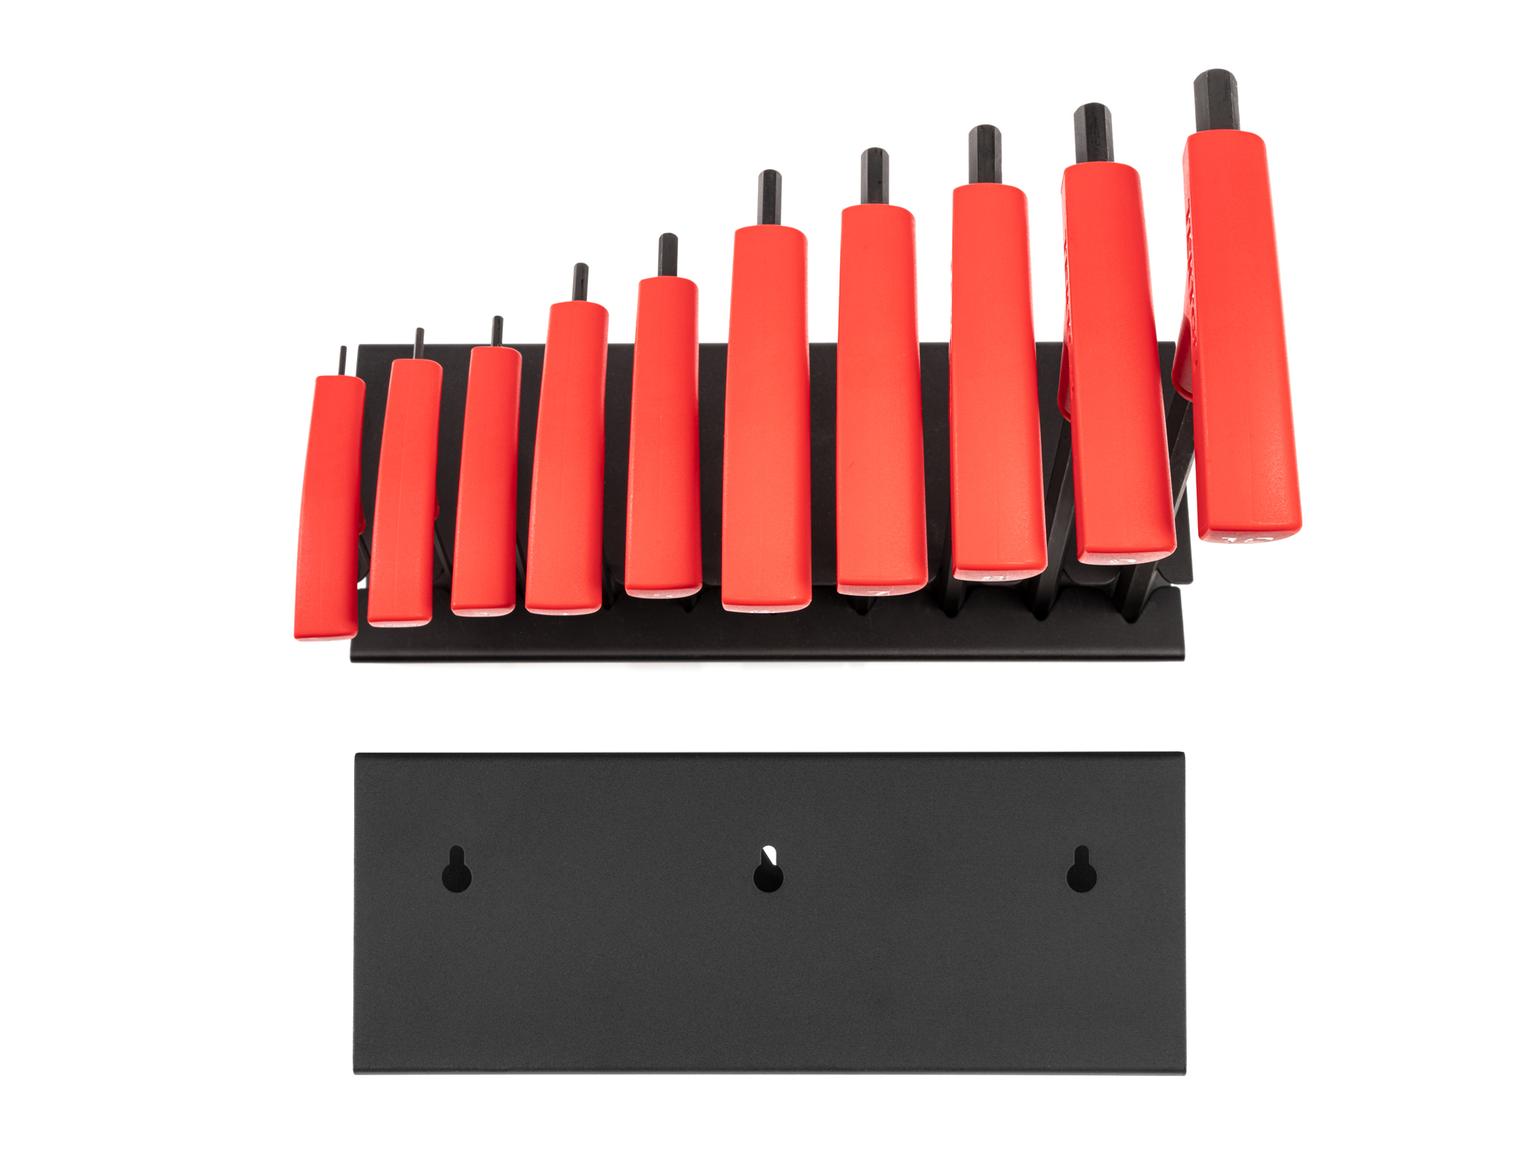 TEKTON KTX92201-T Ball End Hex T-Handle Key Set with Stand, 10-Piece (2-10 mm)